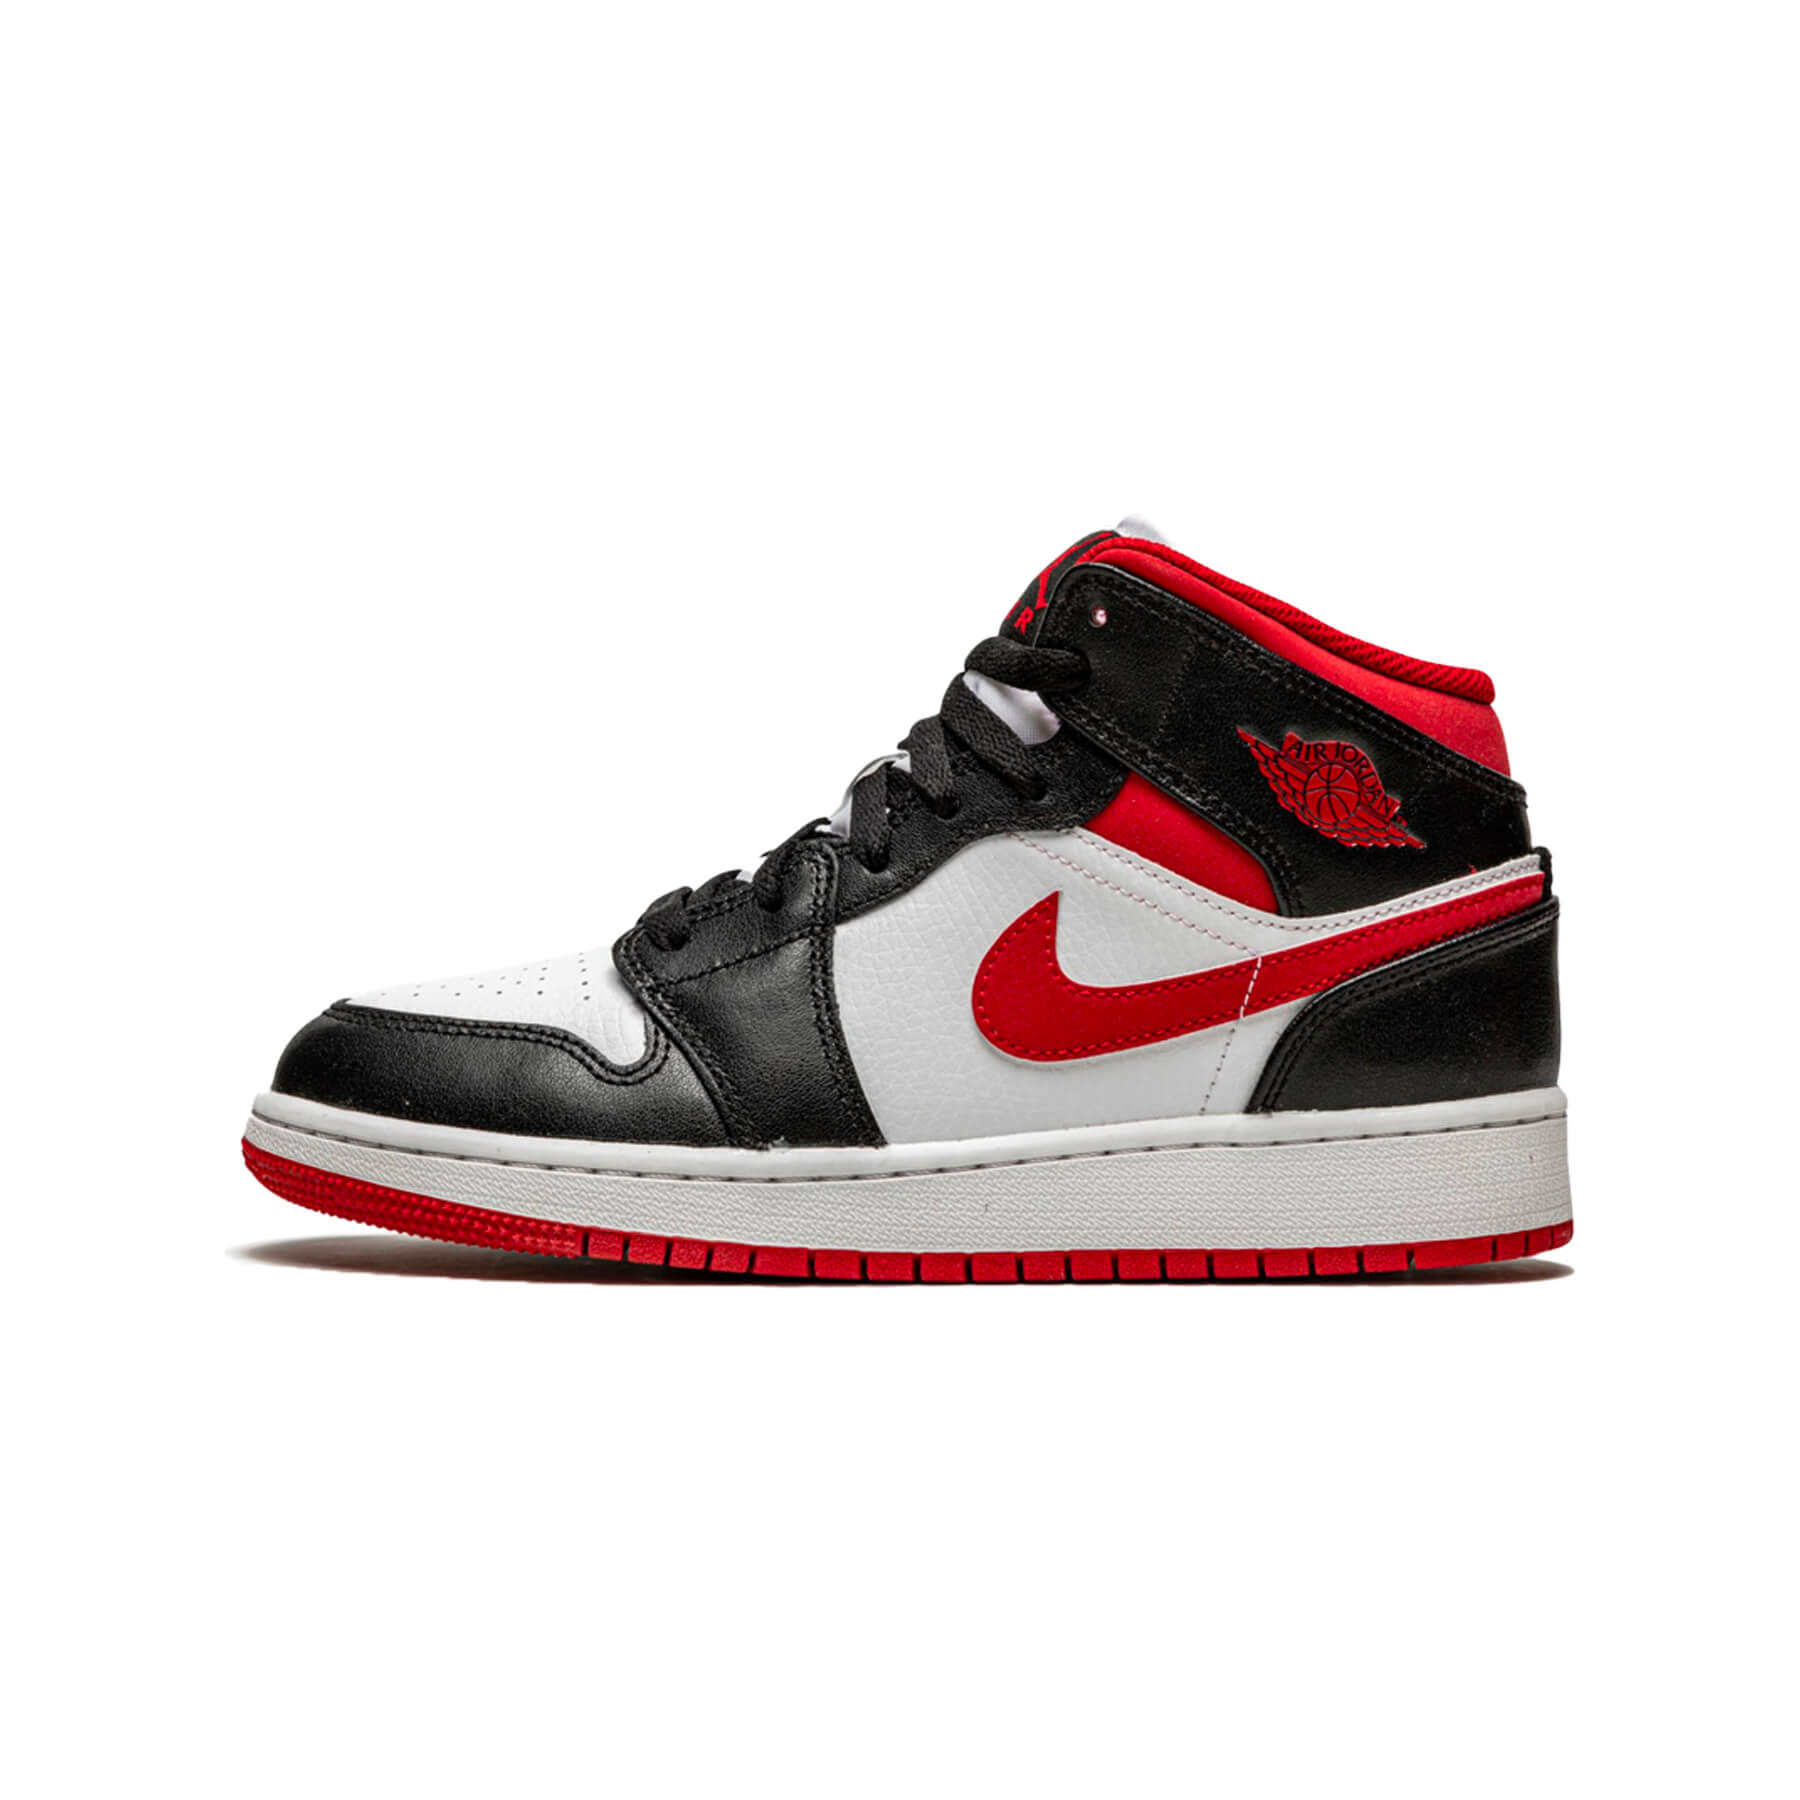 Jordan 1 Mid Gym Red - Fast Delivery